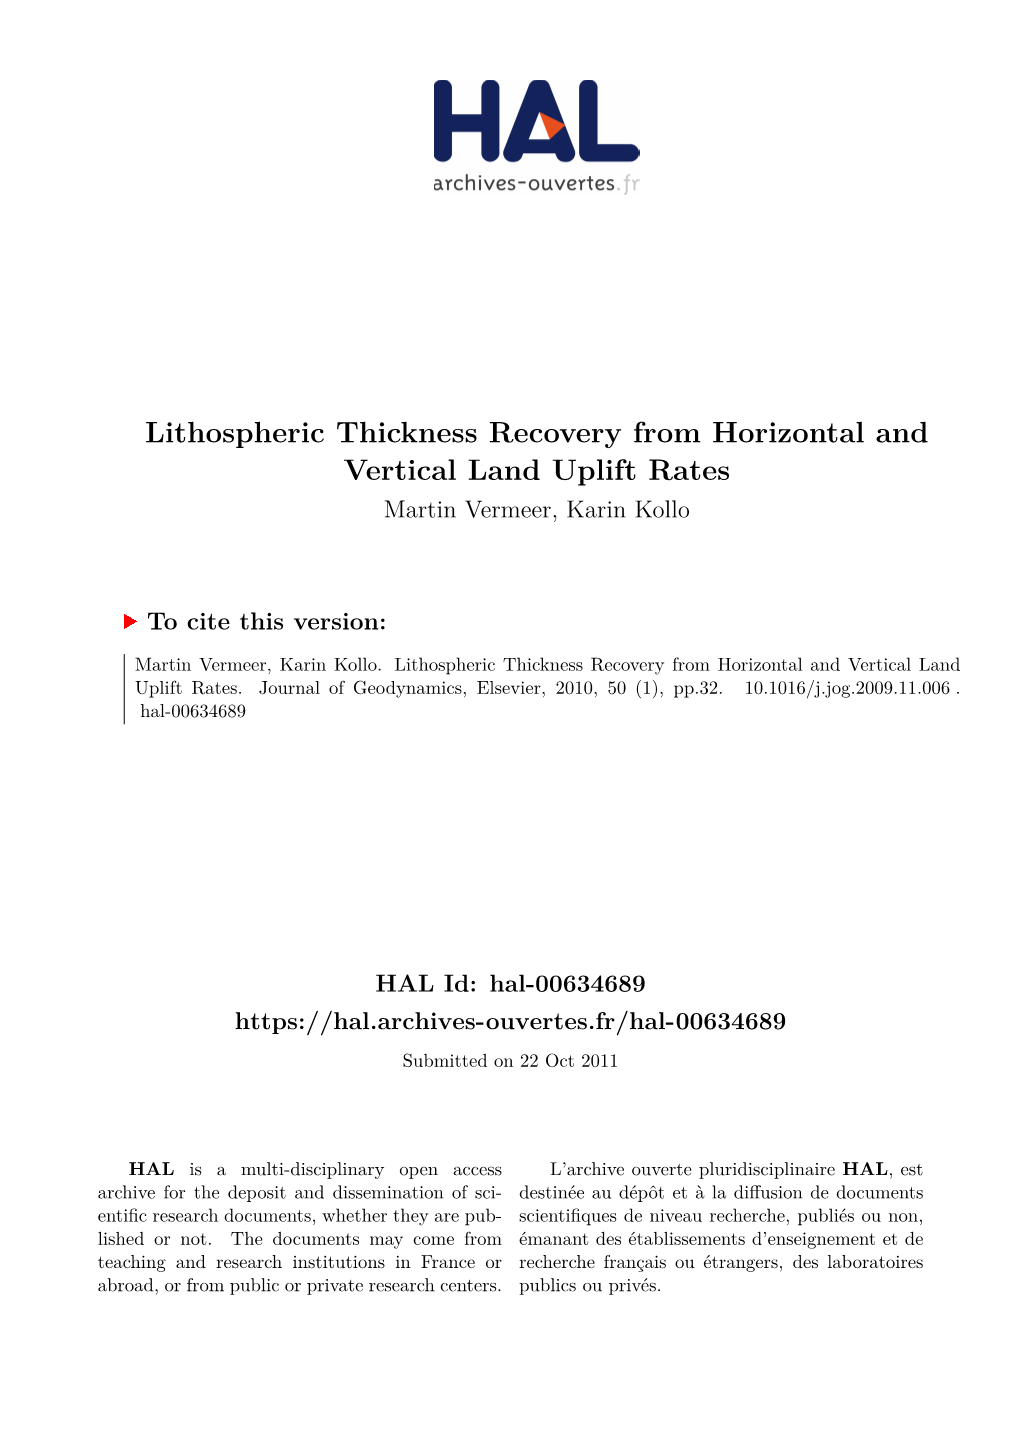 Lithospheric Thickness Recovery from Horizontal and Vertical Land Uplift Rates Martin Vermeer, Karin Kollo